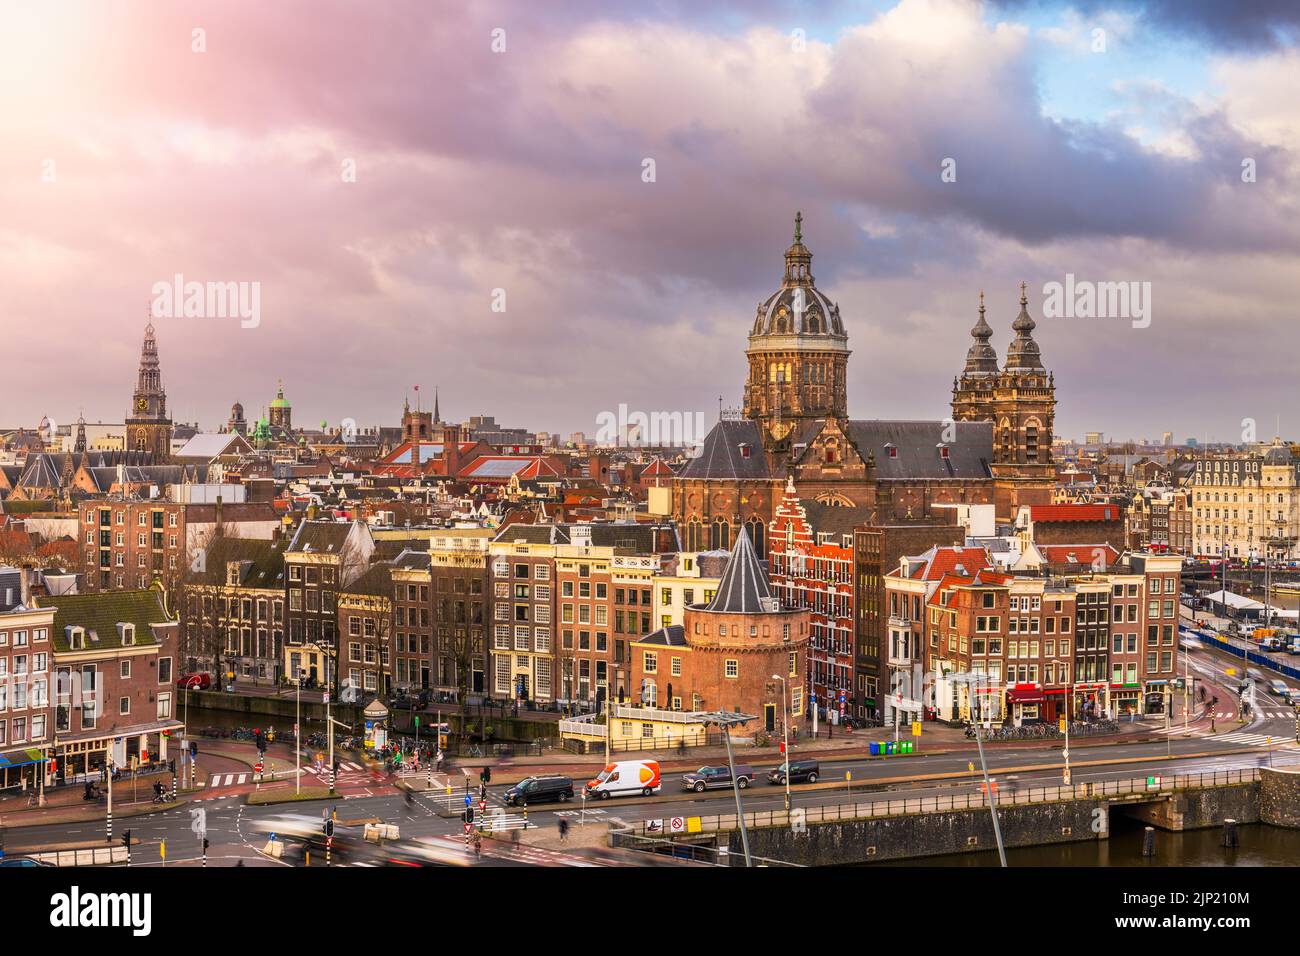 Amsterdam, Netherlands town cityscape over the Old Centre District with Basilica of Saint Nicholas. Stock Photo